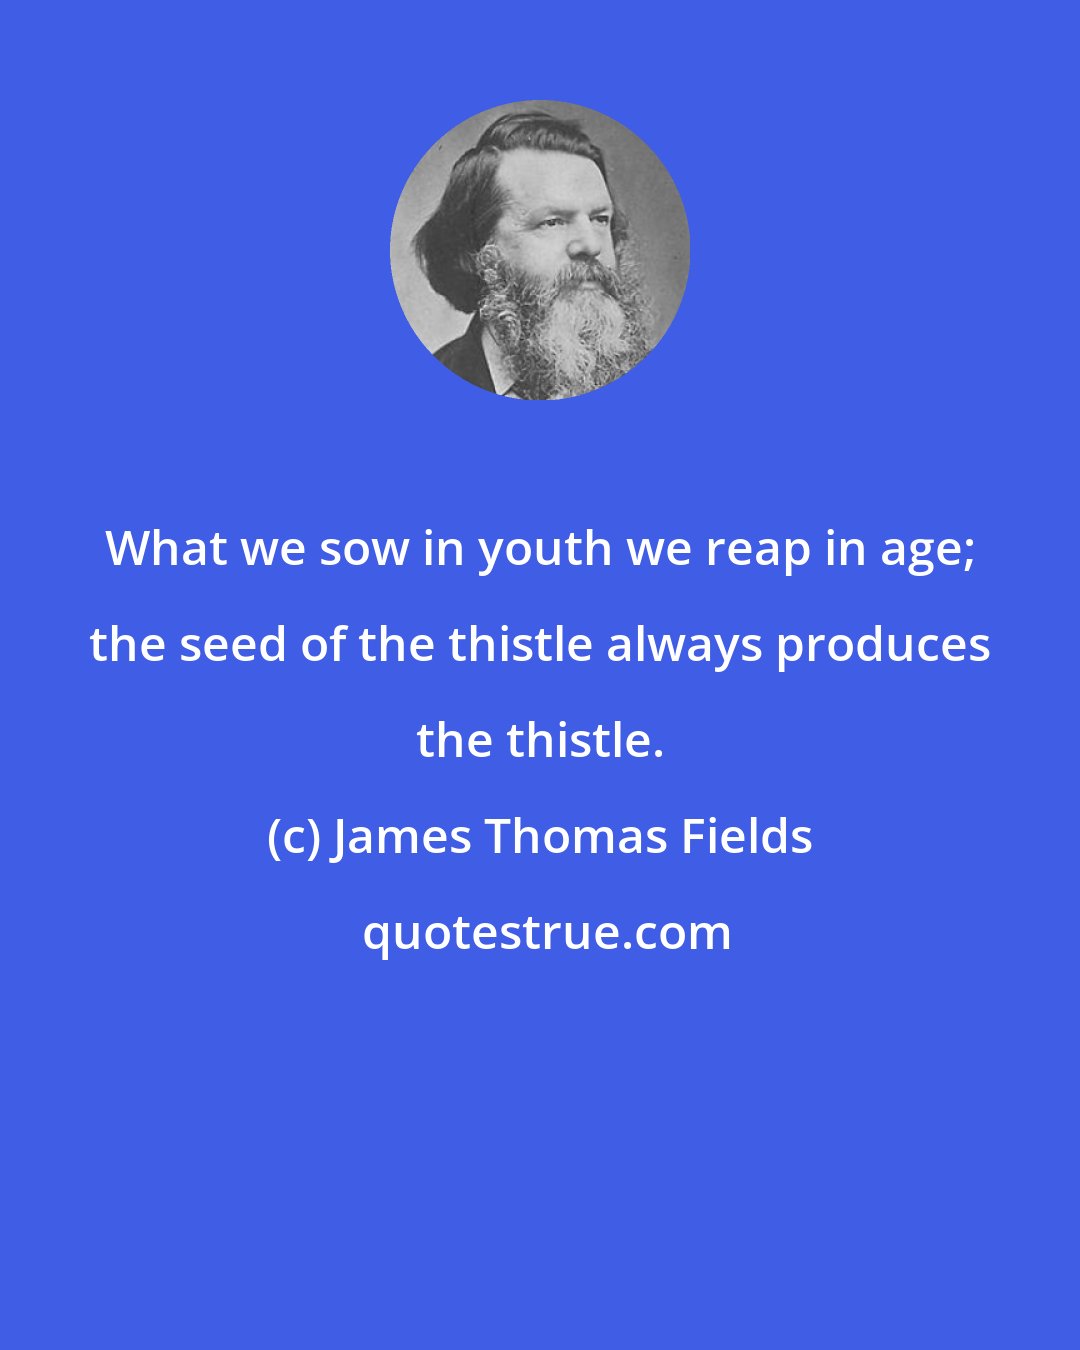 James Thomas Fields: What we sow in youth we reap in age; the seed of the thistle always produces the thistle.